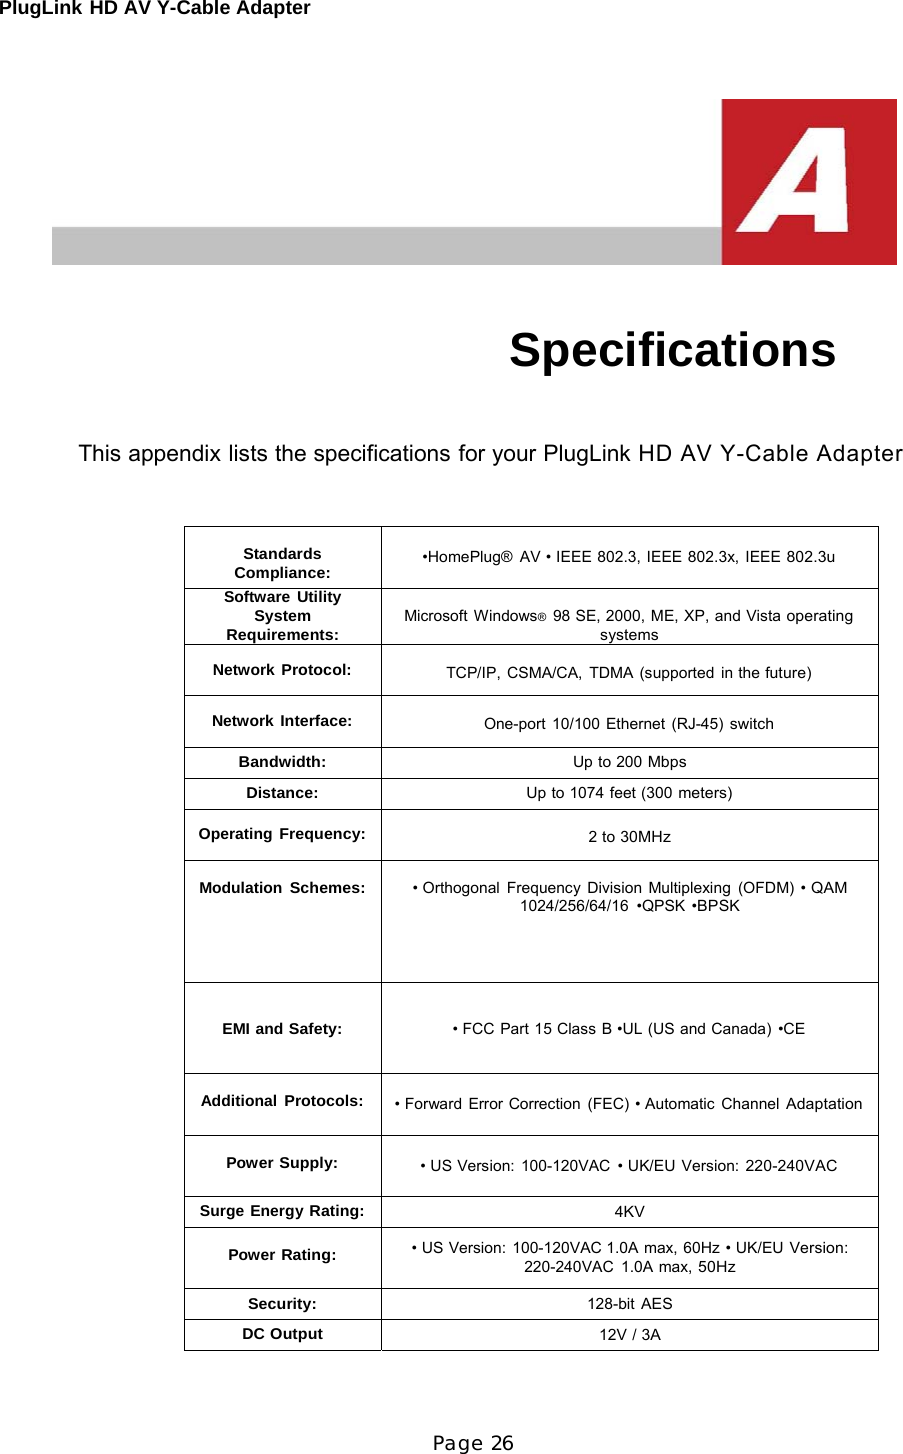 PlugLink HD AV Y-Cable Adapter Page 26           Specifications    This appendix lists the specifications for your PlugLink HD AV Y-Cable Adapter     Standards Compliance:  •HomePlug® AV • IEEE 802.3, IEEE 802.3x, IEEE 802.3u Software Utility System Requirements: Microsoft Windows®  98 SE, 2000, ME, XP, and Vista operating systems Network Protocol:  TCP/IP, CSMA/CA, TDMA (supported in the future)  Network Interface:  One-port 10/100 Ethernet (RJ-45) switch Bandwidth: Up to 200 Mbps Distance: Up to 1074 feet (300 meters)  Operating Frequency: 2 to 30MHz  Modulation Schemes: • Orthogonal Frequency Division Multiplexing (OFDM) • QAM 1024/256/64/16 •QPSK •BPSK   EMI and Safety:   • FCC Part 15 Class B •UL (US and Canada) •CE  Additional Protocols:  • Forward Error Correction  (FEC) • Automatic Channel Adaptation  Power Supply:  • US Version: 100-120VAC  • UK/EU Version: 220-240VAC Surge Energy Rating: 4KV  Power Rating:  • US Version: 100-120VAC 1.0A max, 60Hz • UK/EU Version: 220-240VAC 1.0A max, 50Hz Security: 128-bit AES DC Output 12V / 3A 